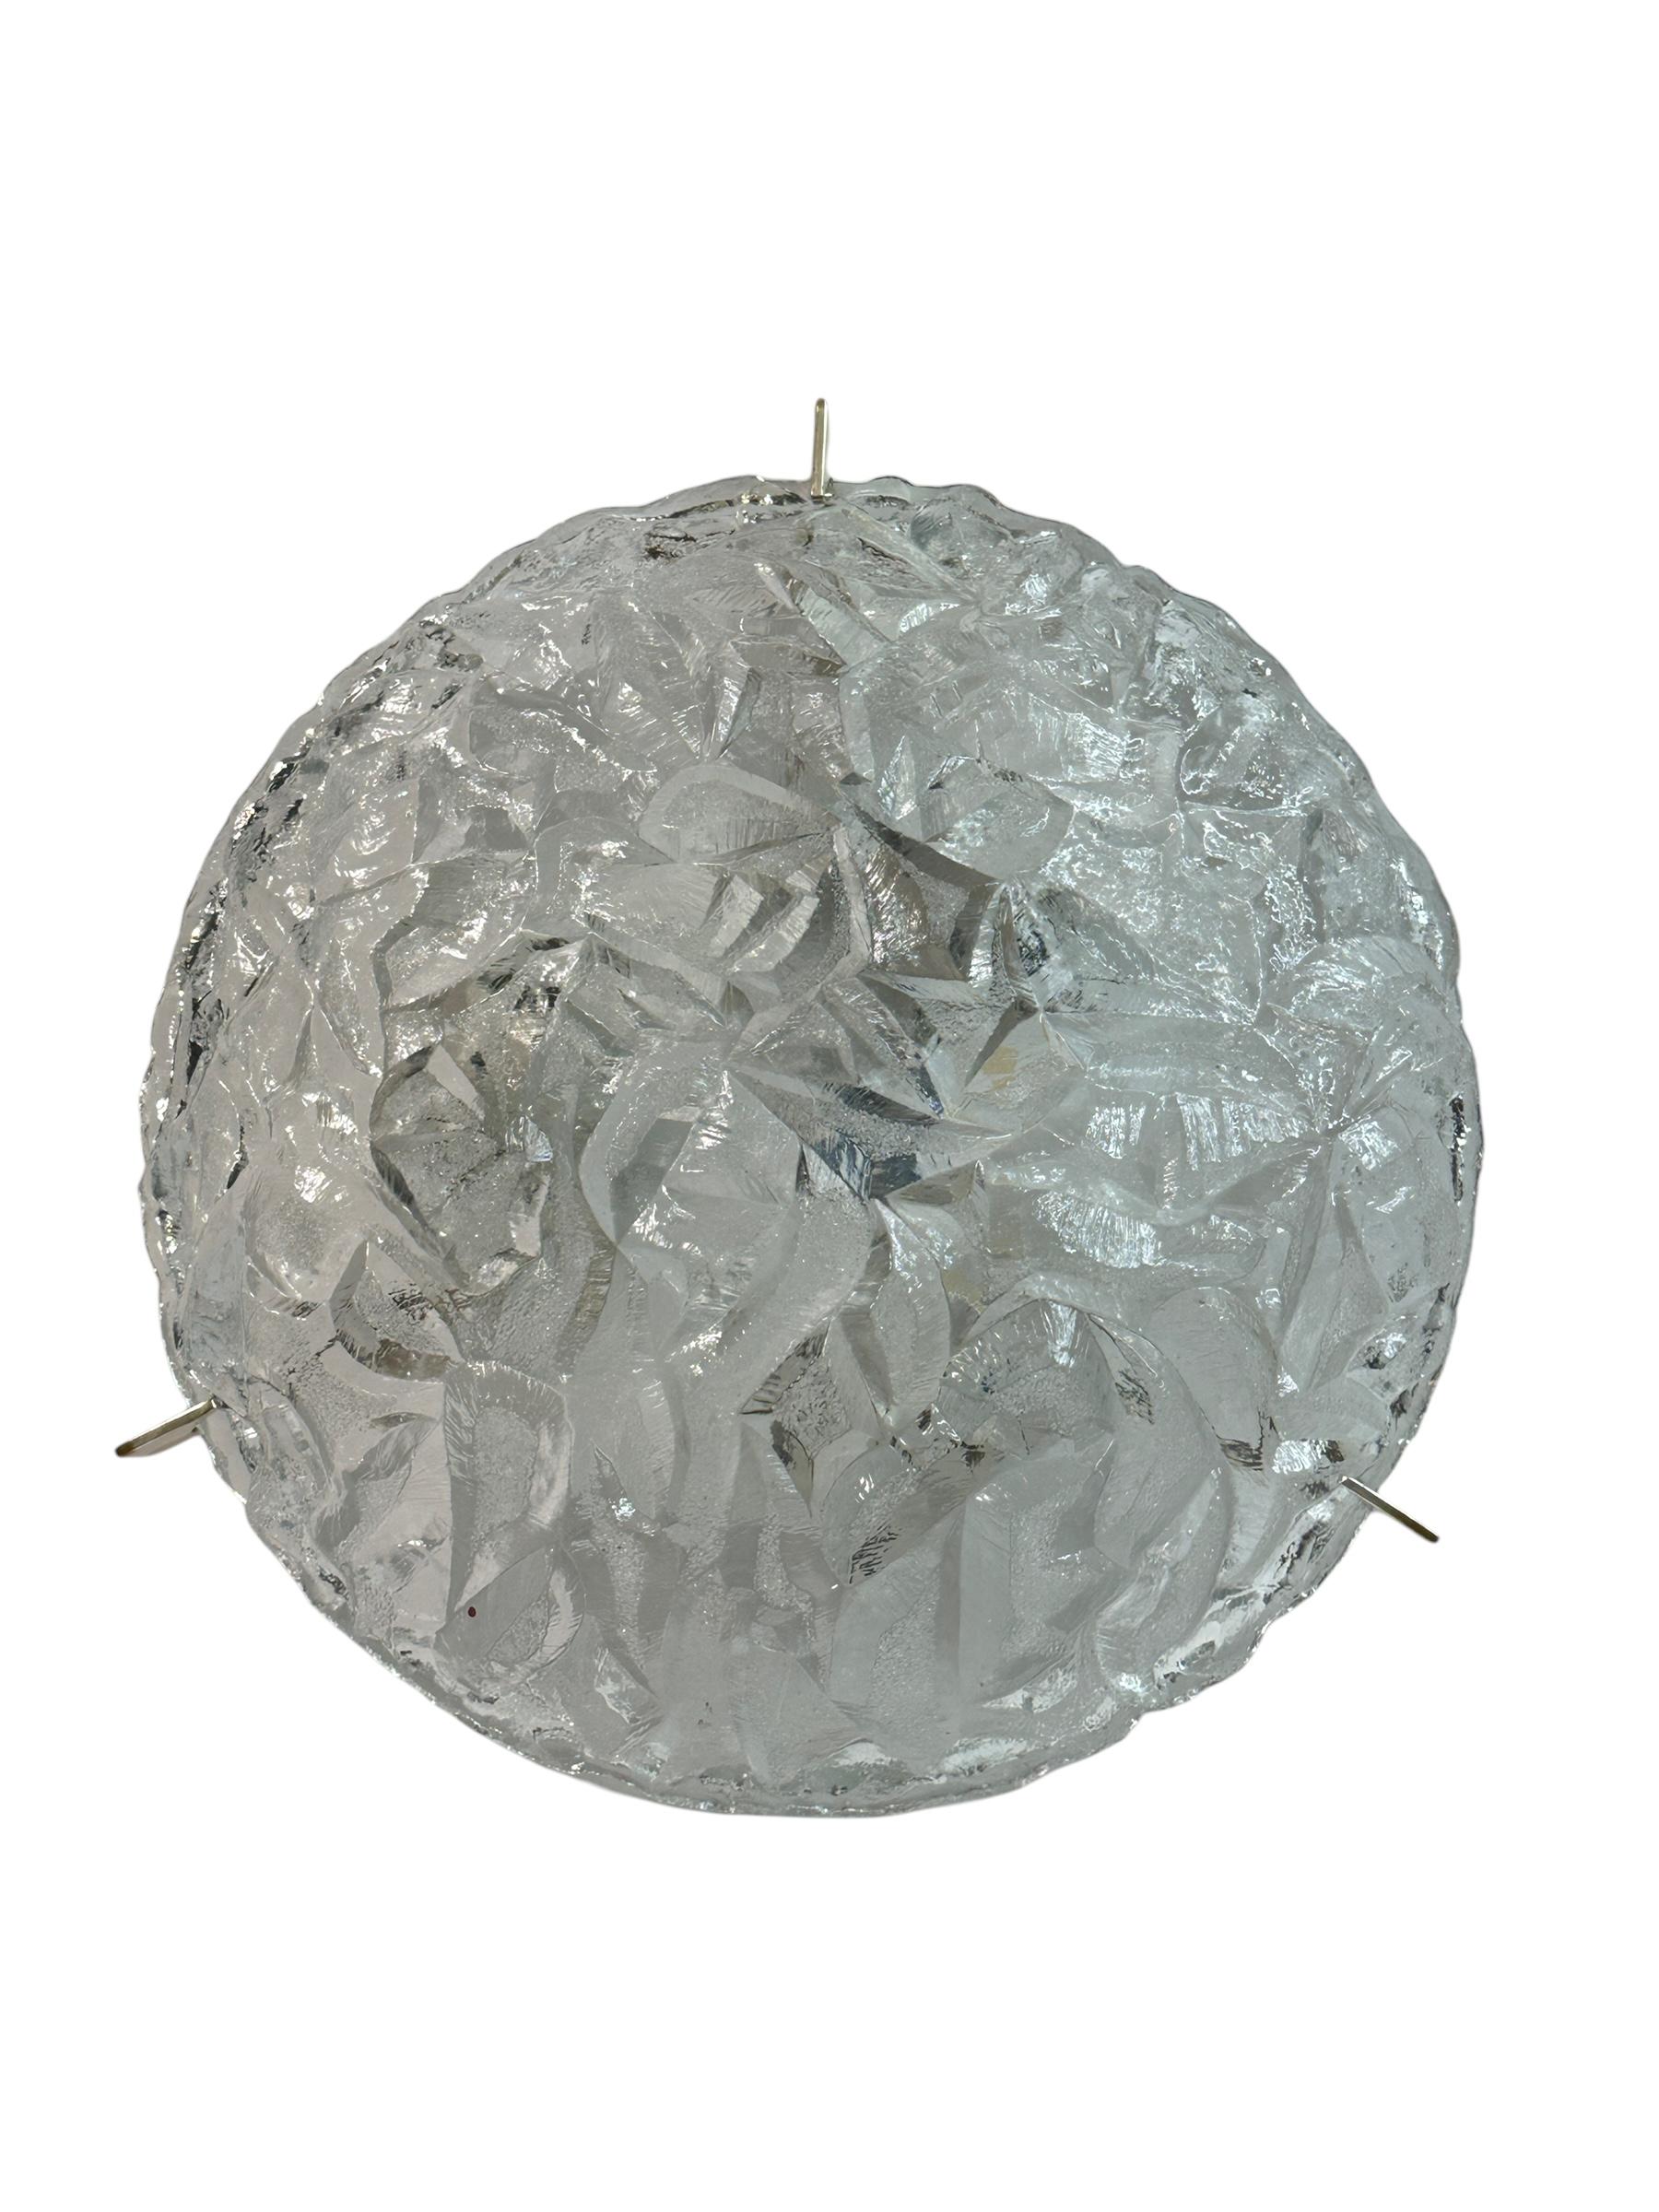 A beautiful ice glass flush mount. Made in Italy in the 1970s. Gorgeous textured glass flush mount with metal fixture. The Fixture requires three European E14 / 110 Volt Candelabra bulbs, each bulb up to 60 watts. A nice addition to any room. Found